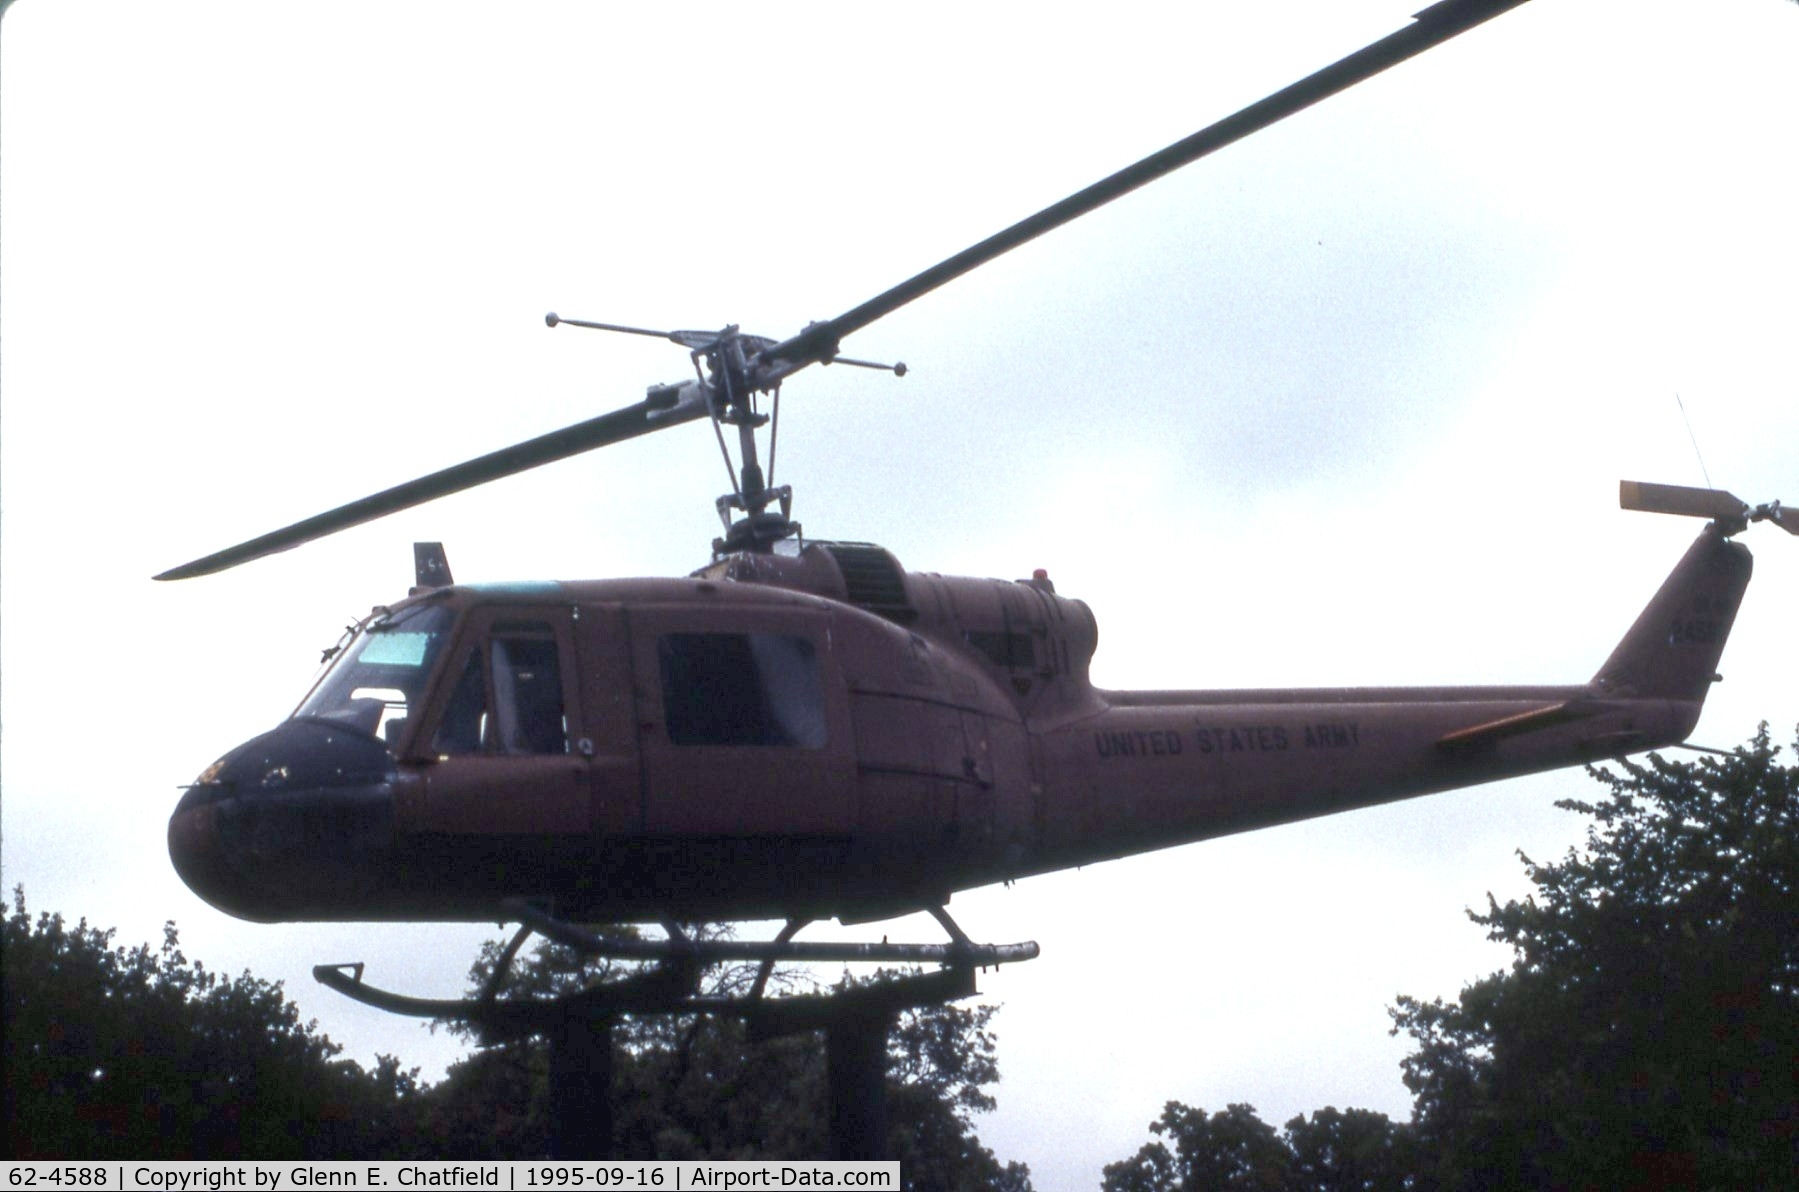 62-4588, 1963 Bell UH-1B Iroquois C/N 648, UH-1B at the 45th Infantry Division Museum